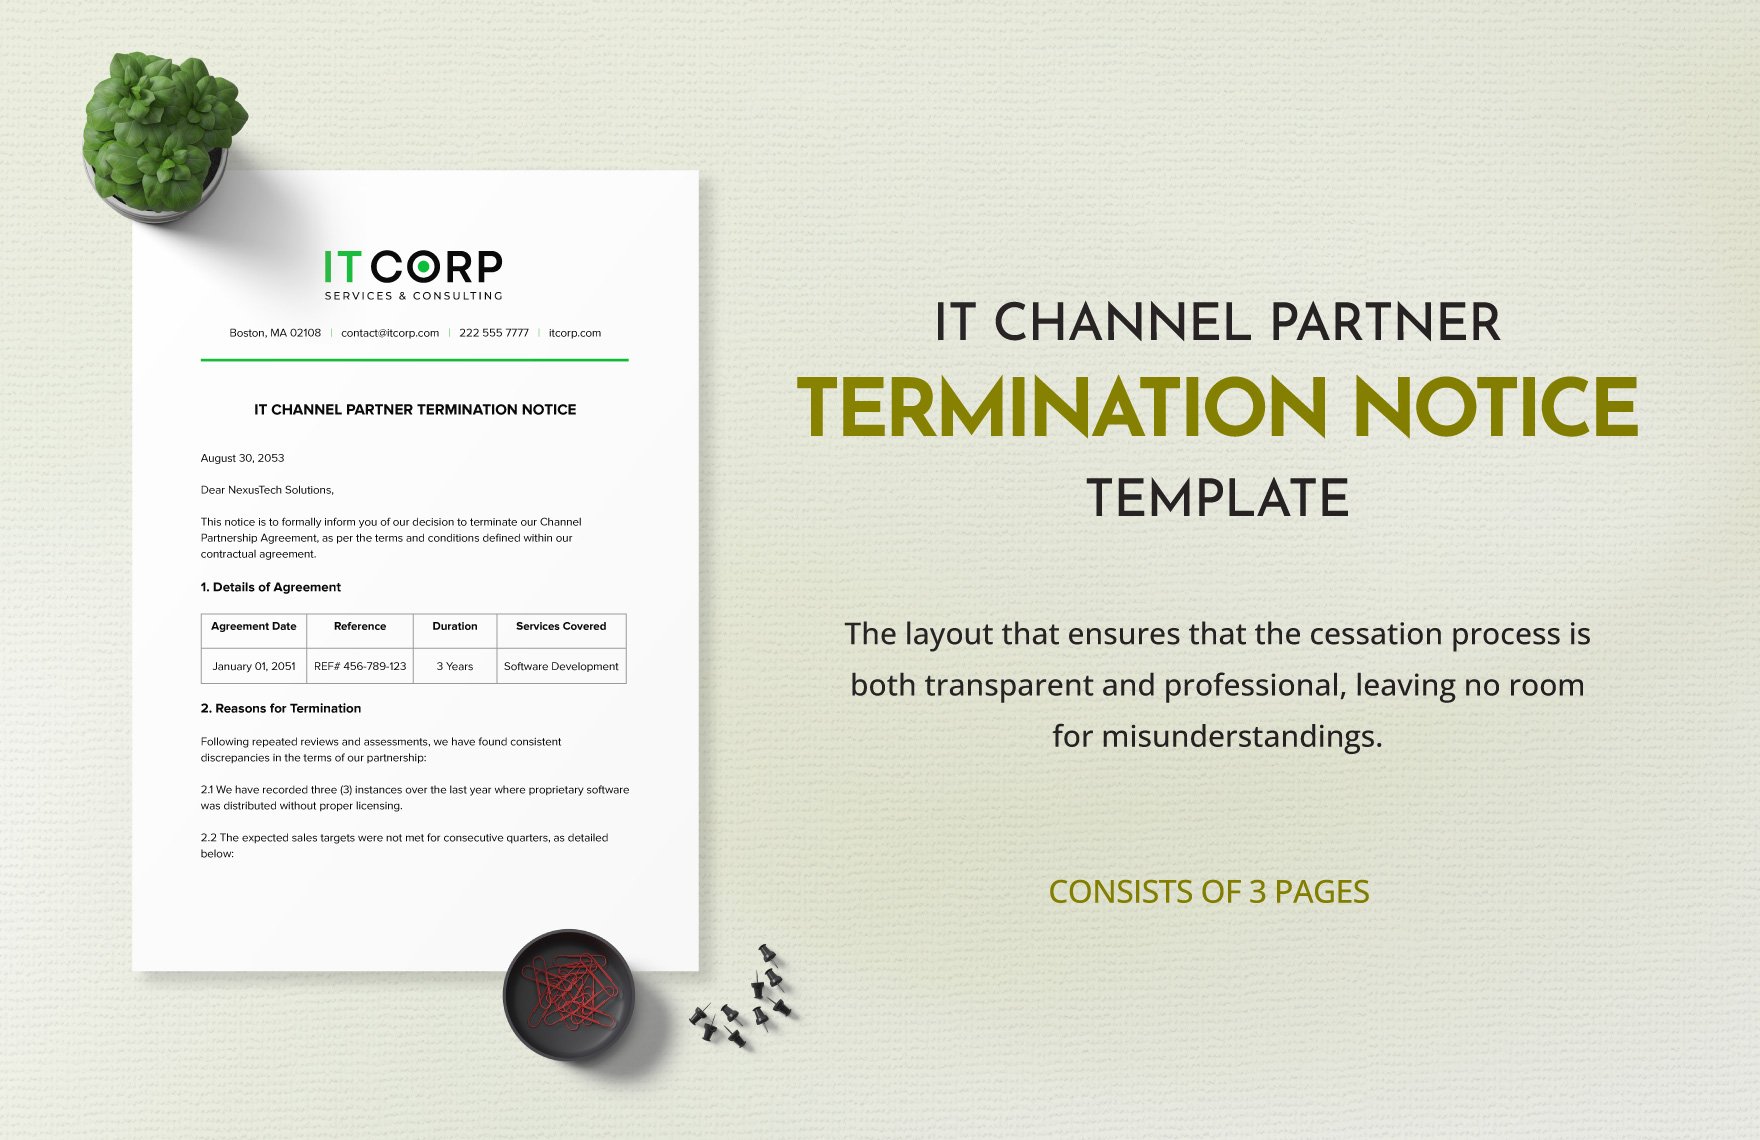 IT Channel Partner Termination Notice Template